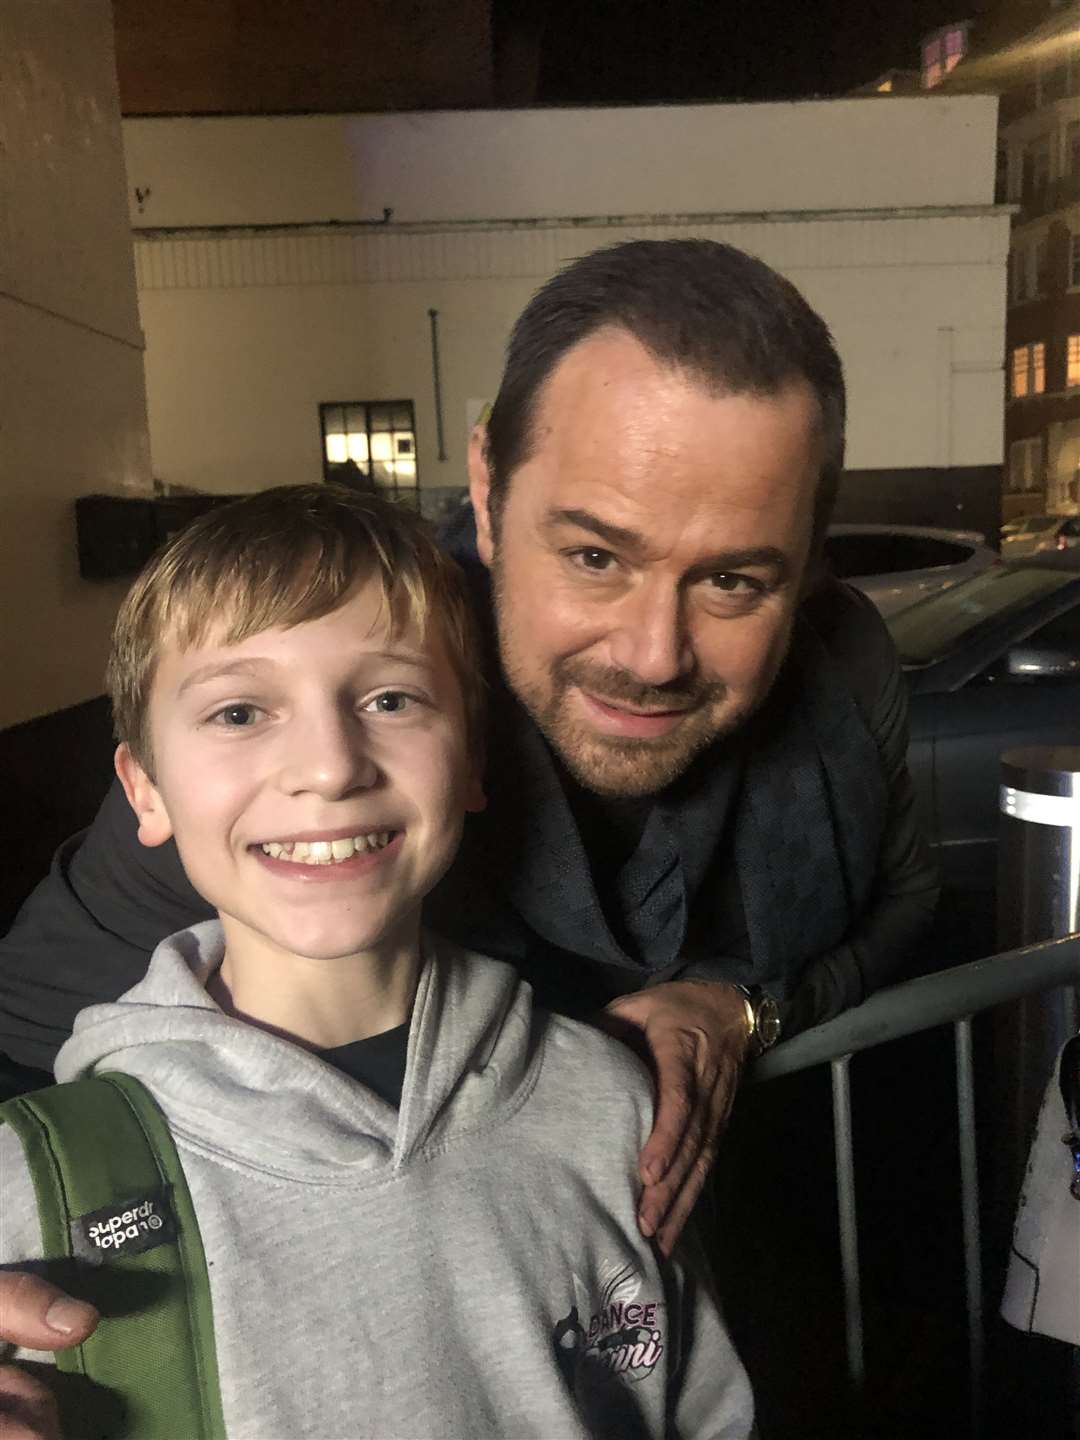 Meeting film and soap star Danny Dyer was a highlight for Louis Relf when performing in Nativity! at the Hammersmith Apollo